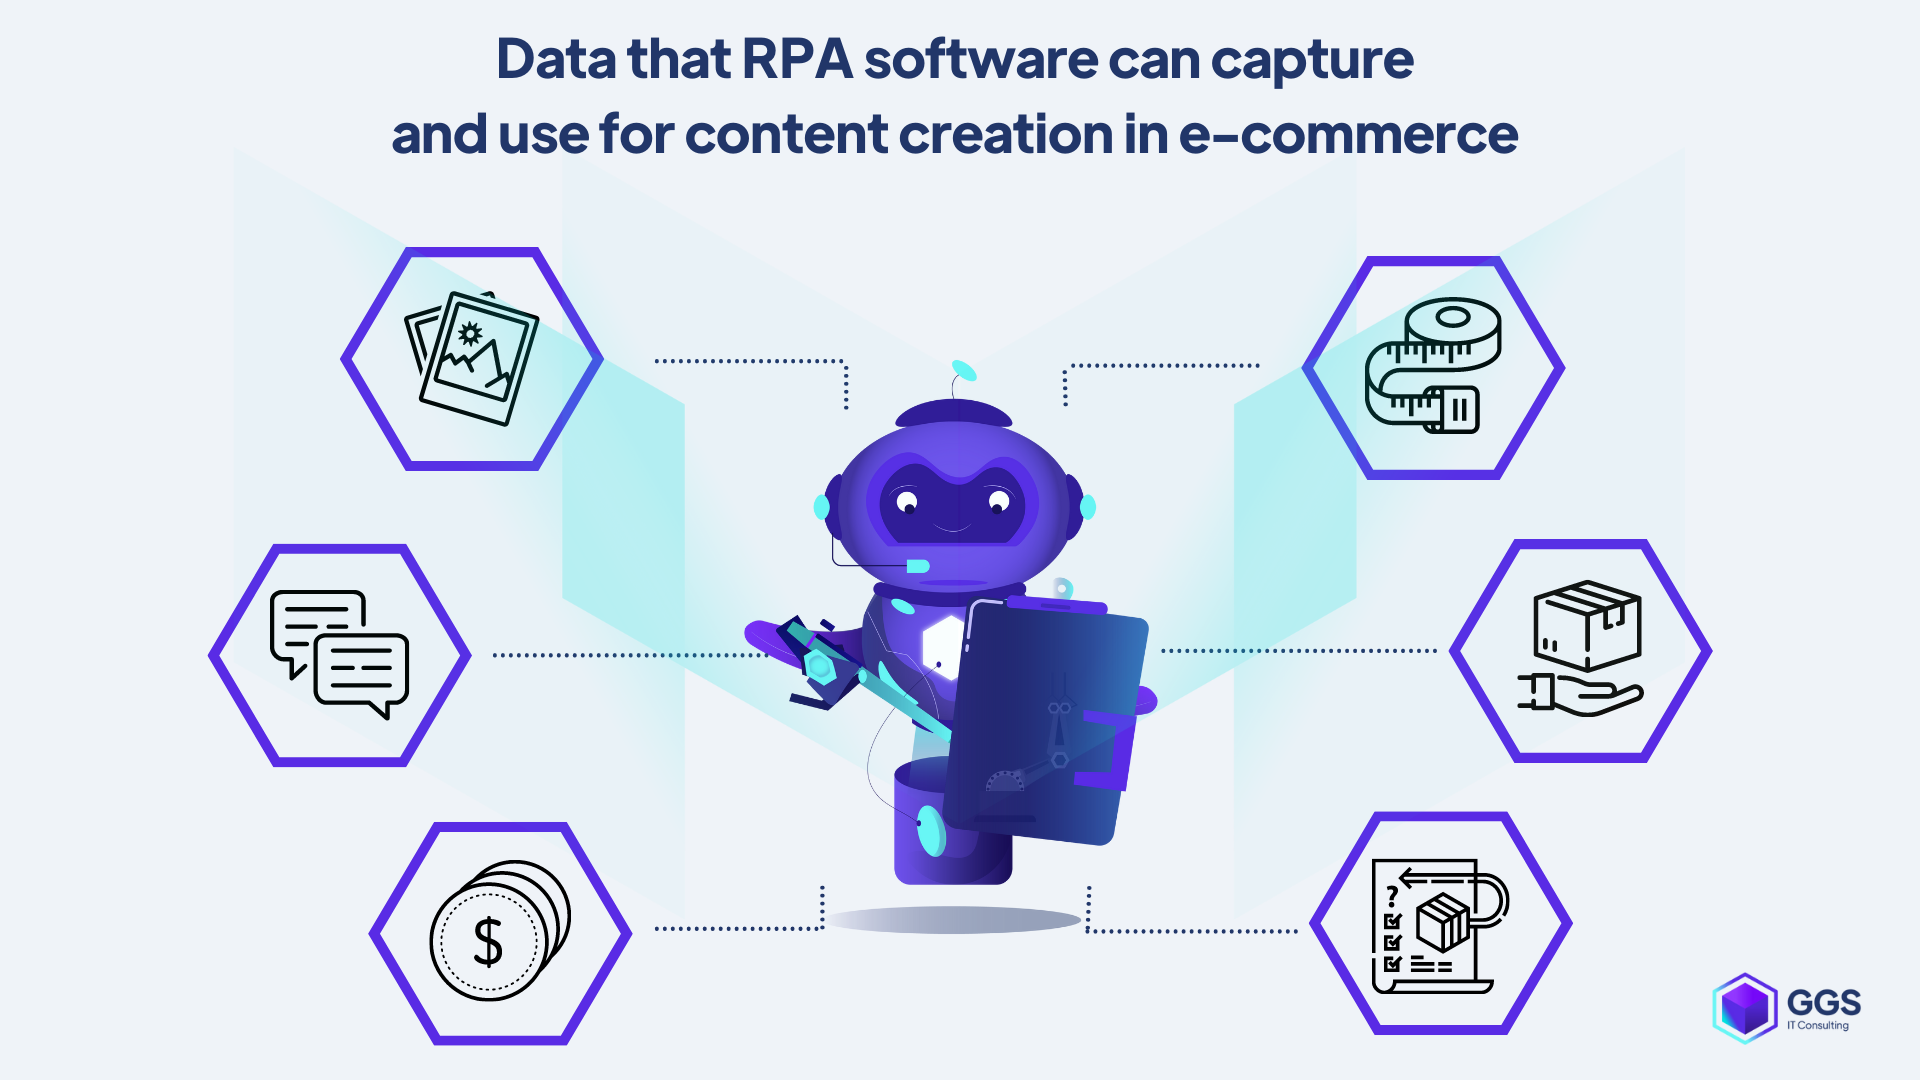 RPA interacting with CMS for content creation e-commerce